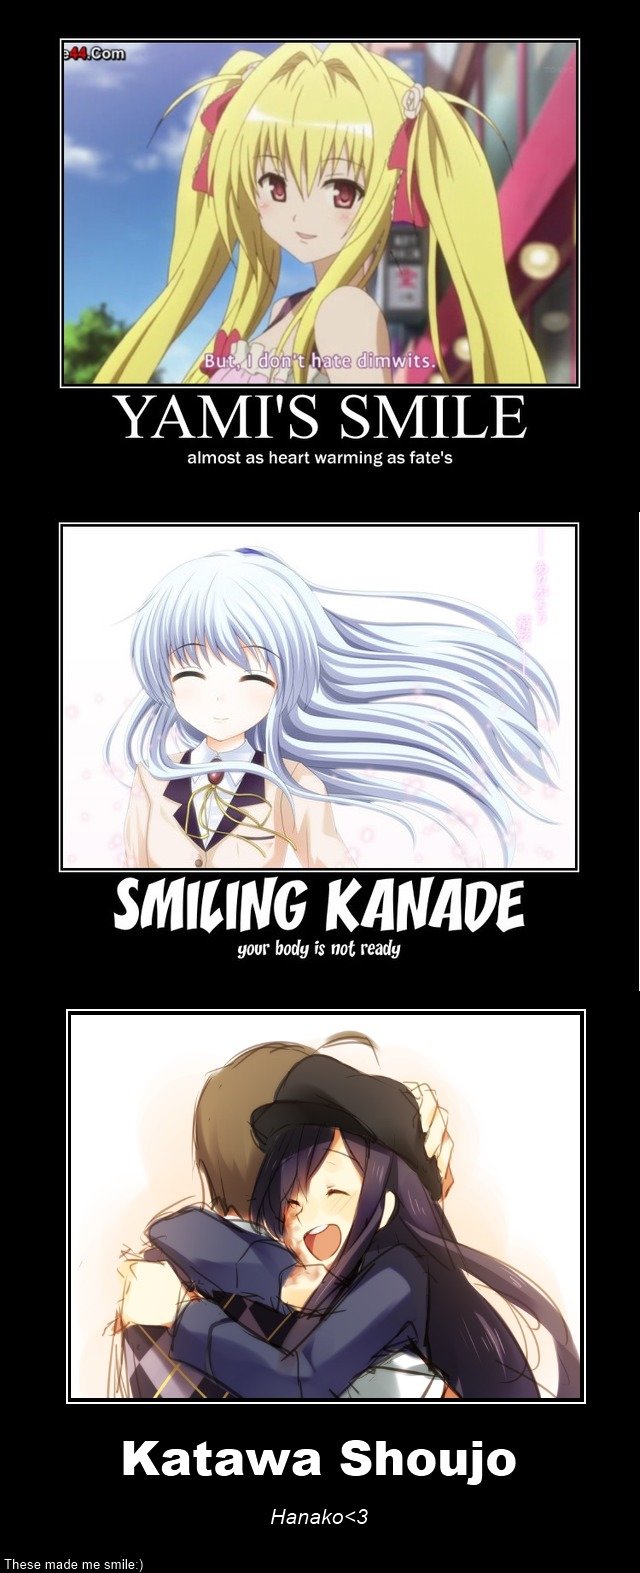 heartwarming smiles. This wasn't supposed to be a mot collection, these just made me smile. almost as heart warming as fate/ s iii mar body is not ready Katawa 